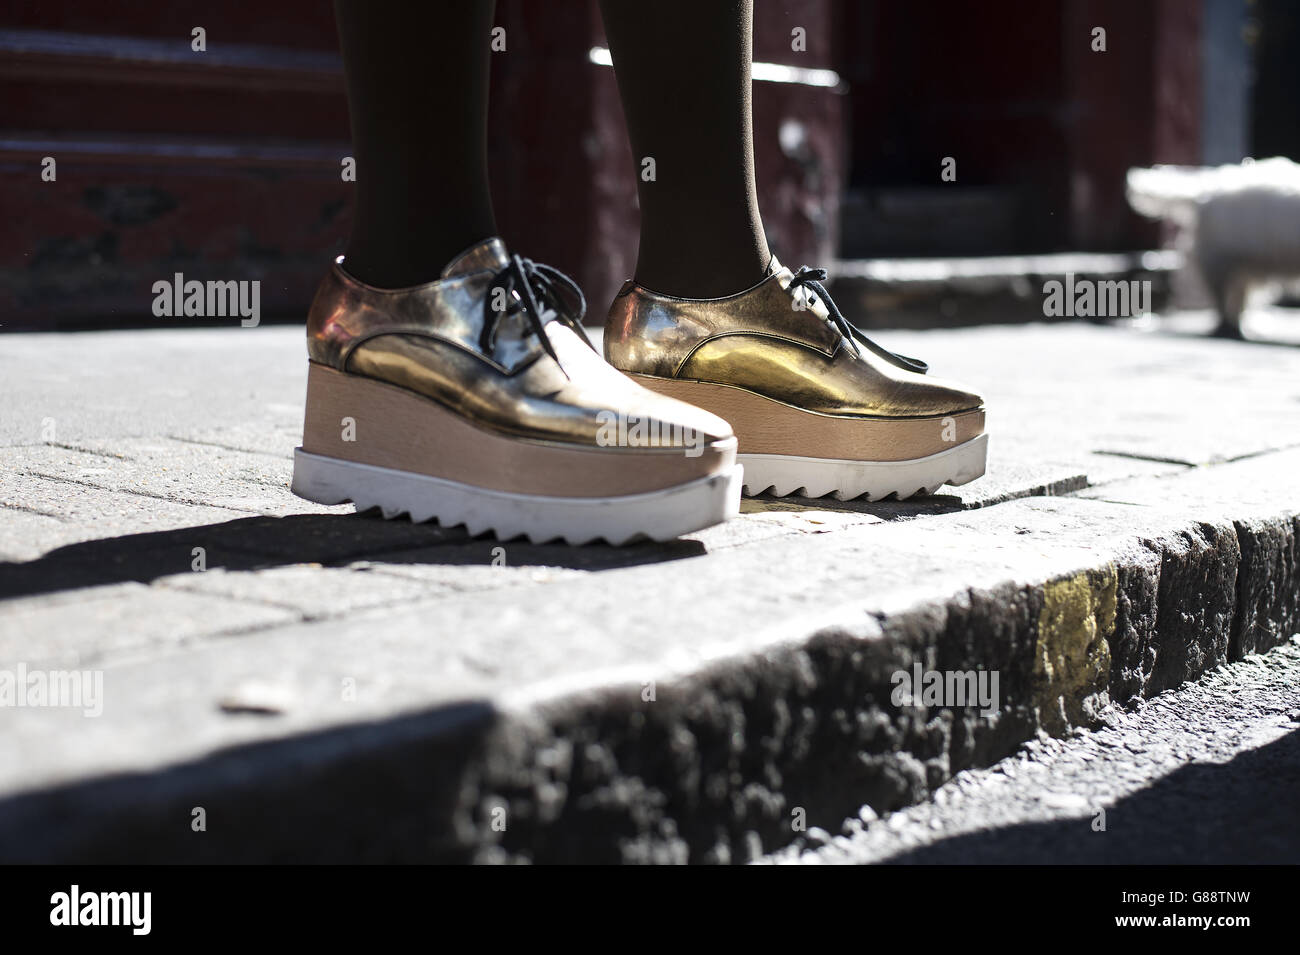 mccartney shoes photography and images - Alamy